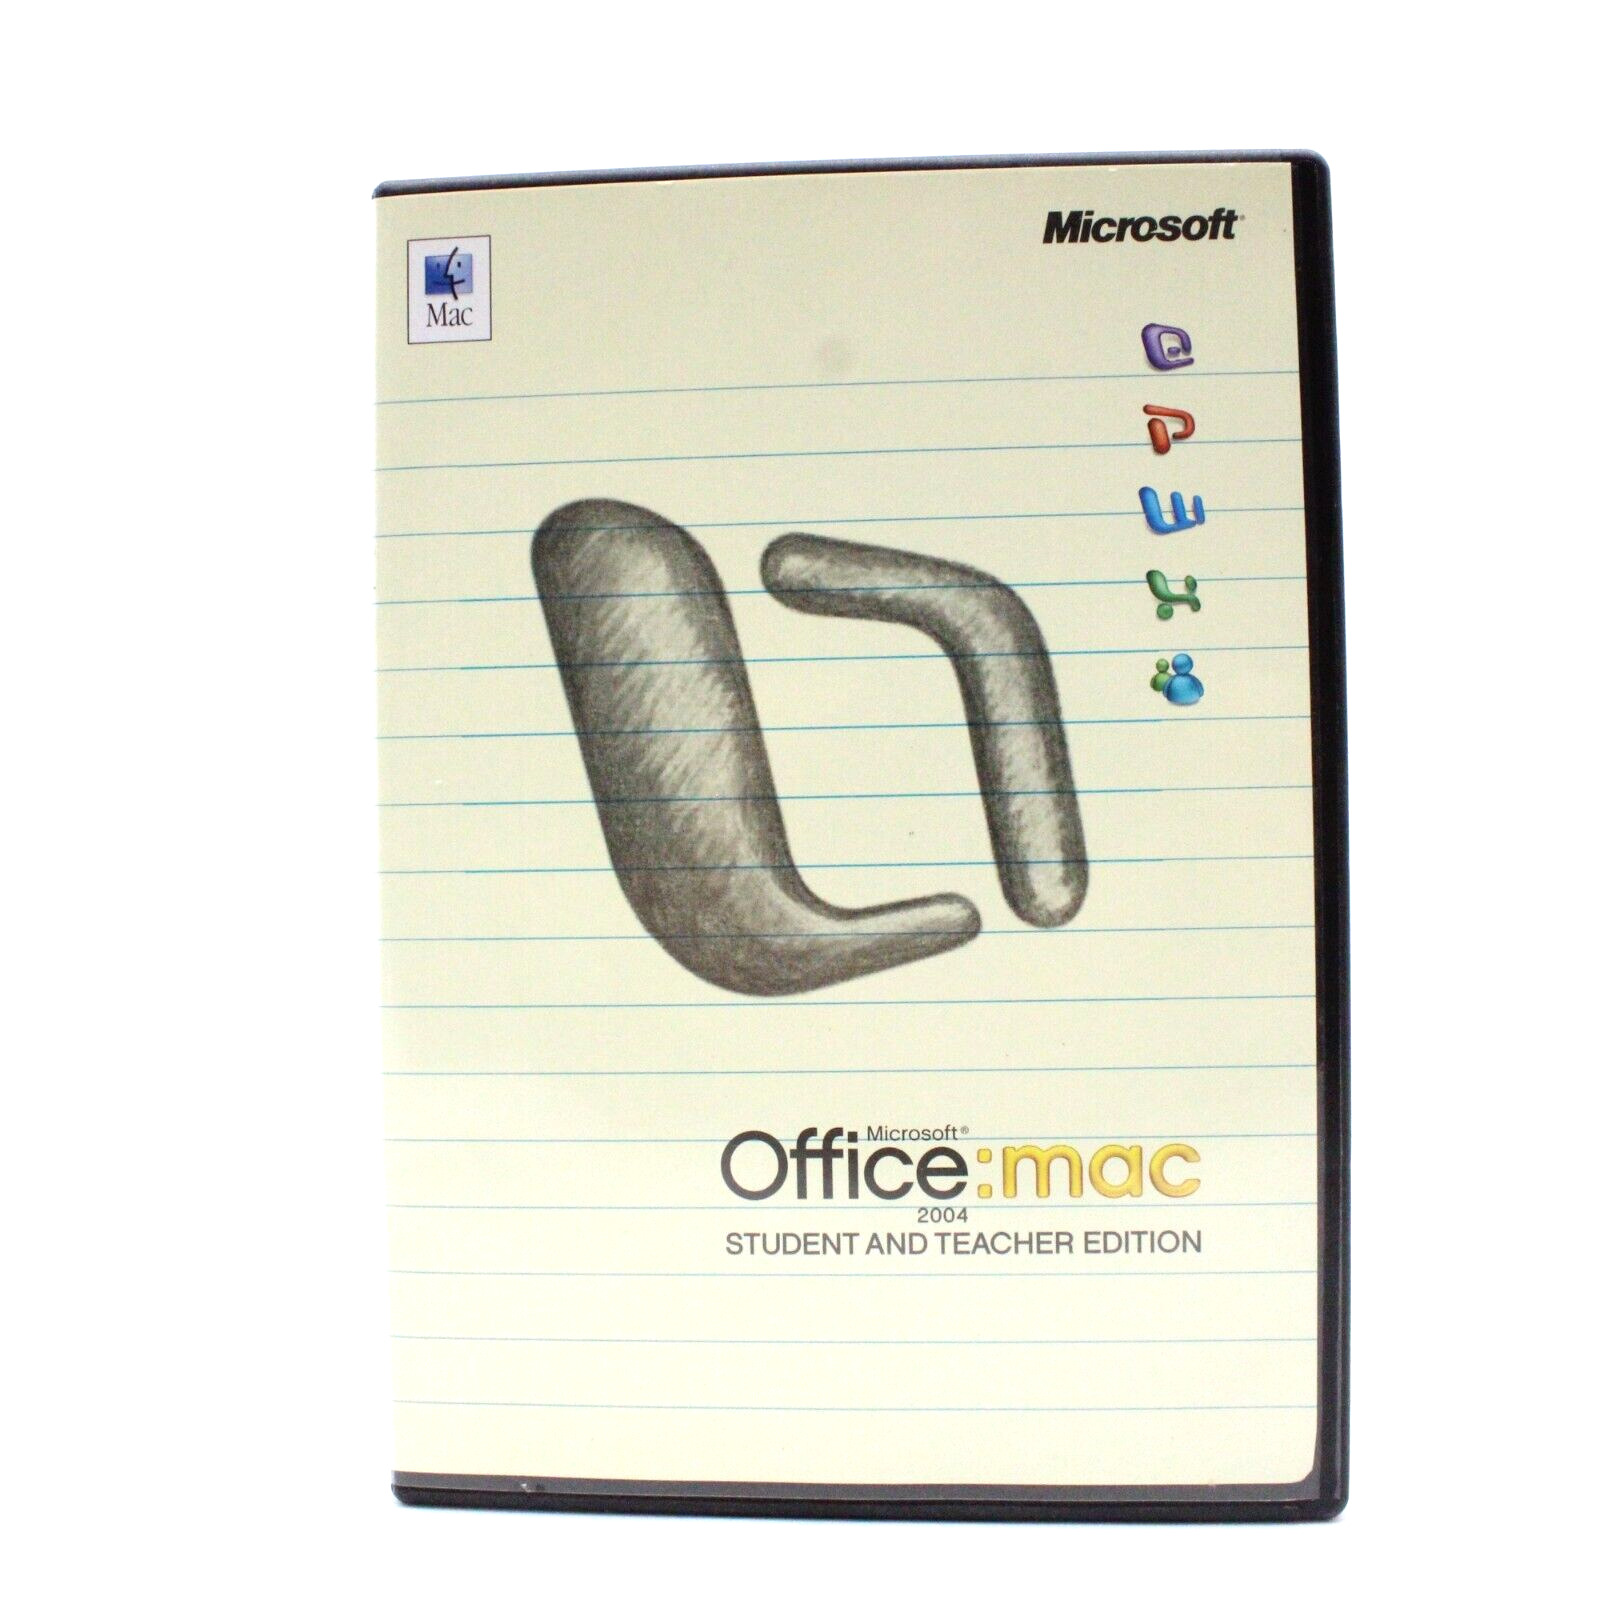 Microsoft Office Mac 2004 Student and Teacher Edition Software 3 keys w/ booklet